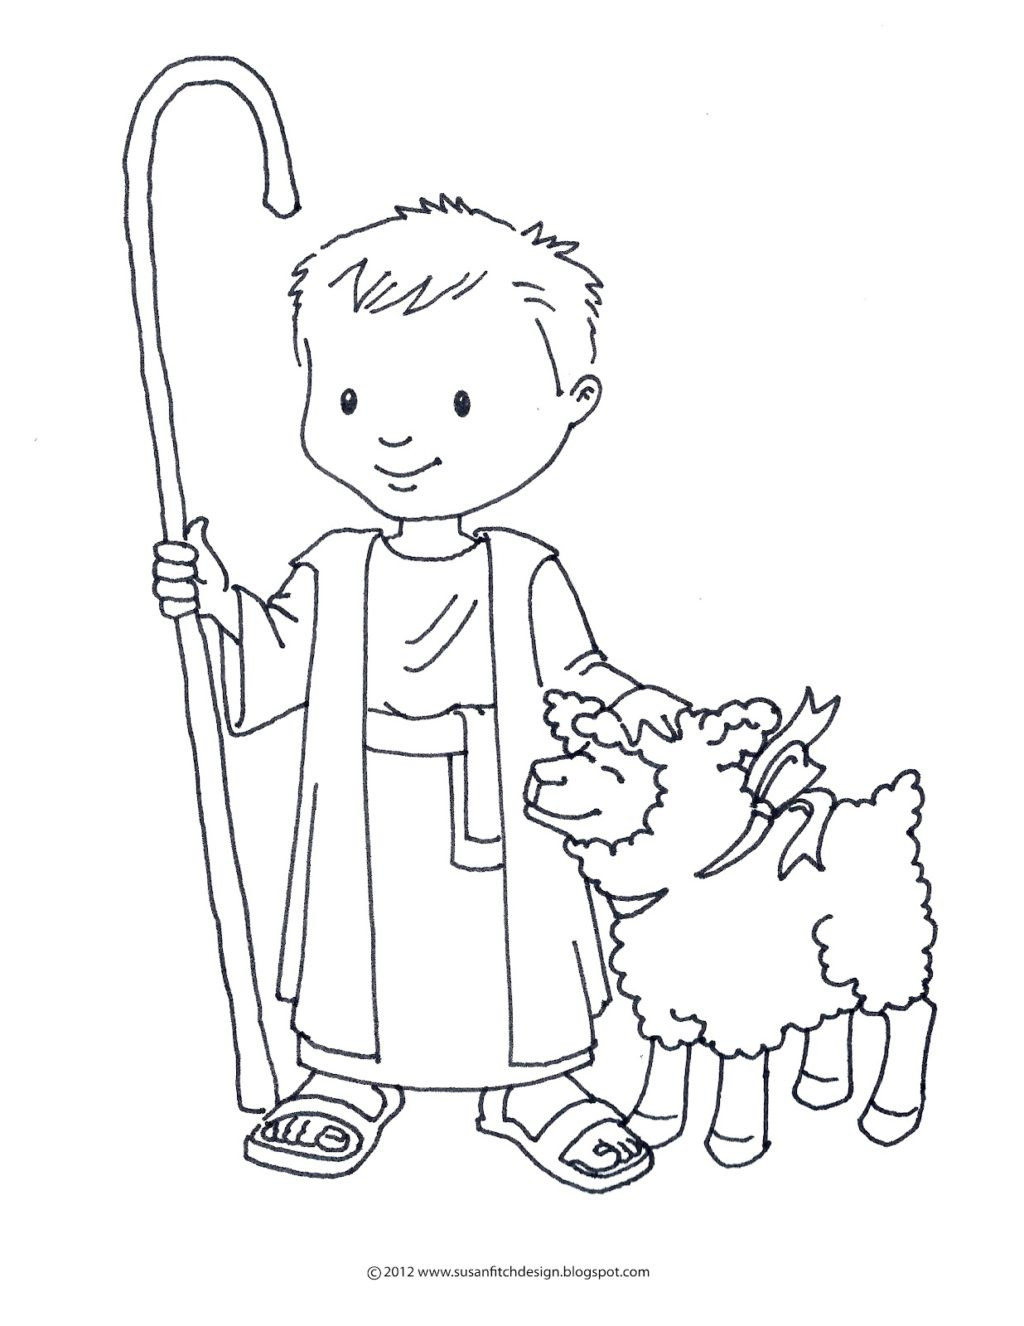 Niki Coloring Pages For Boys
 The top 20 Ideas About Niki the Sheep Coloring Pages for